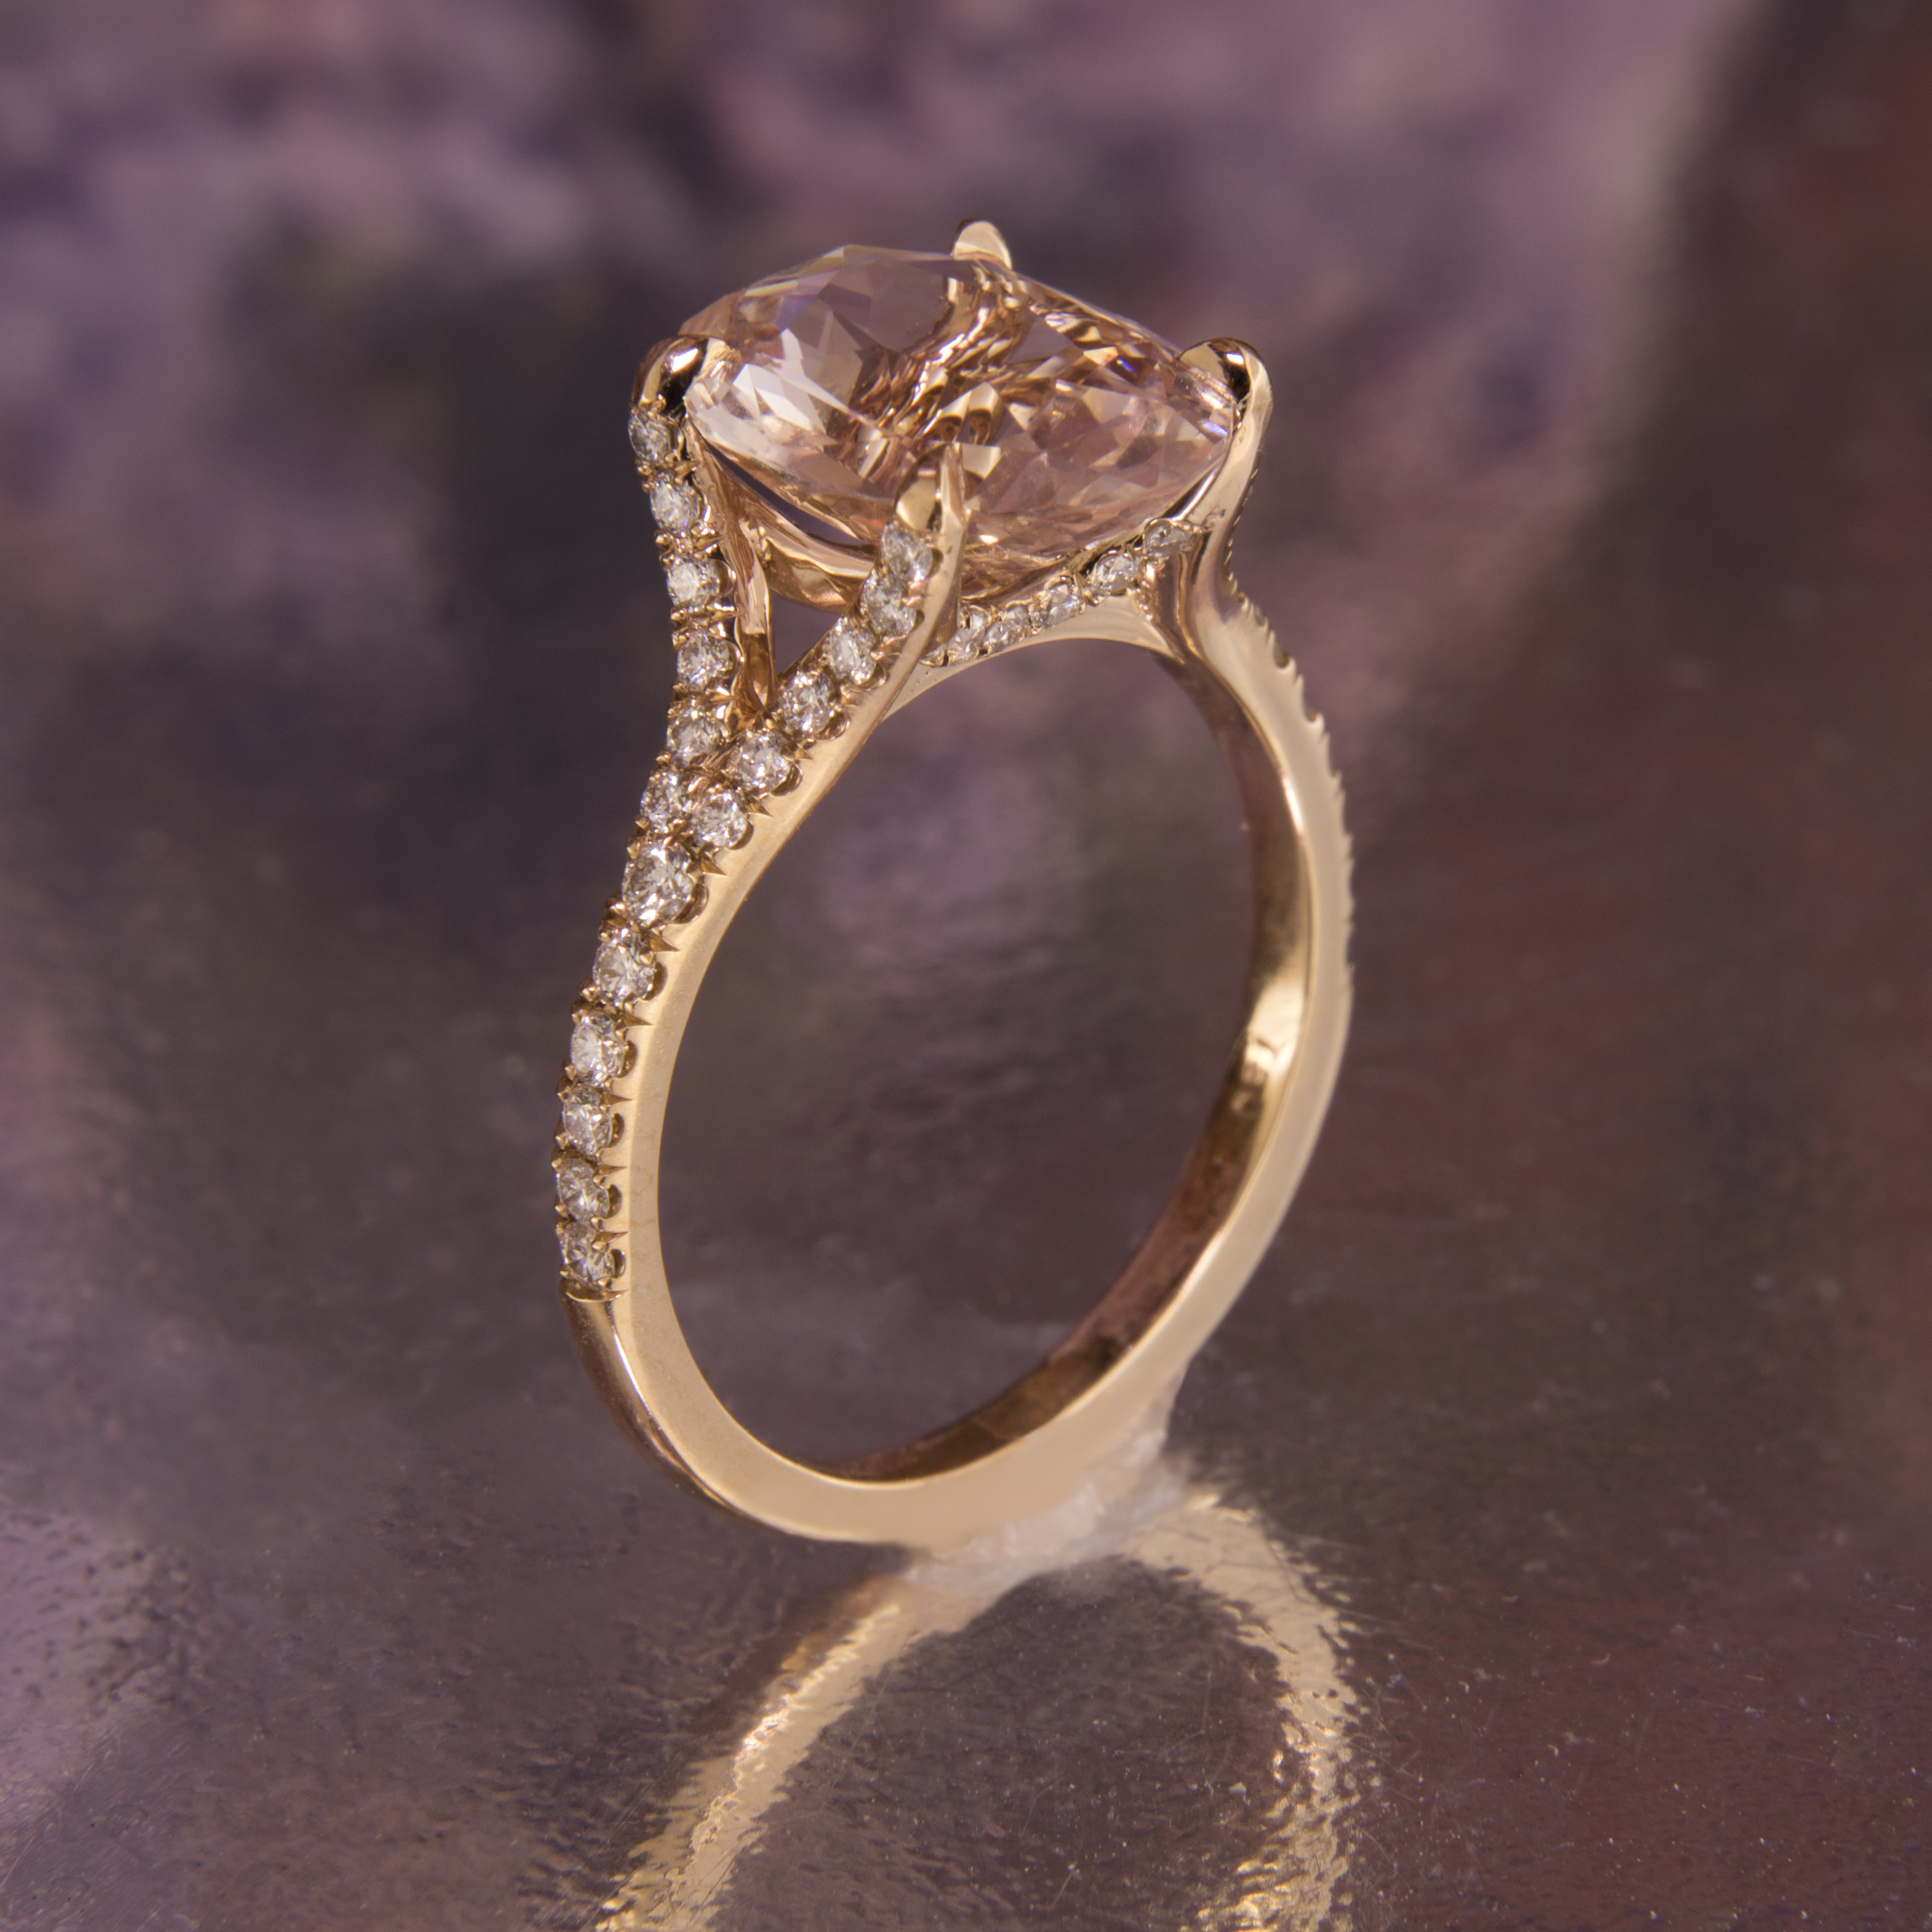 The Padparadscha Sapphire Engagement Ring Soho Gem Fine Jewelry Boutique,Patio Small Backyard Landscaping Ideas Do Myself